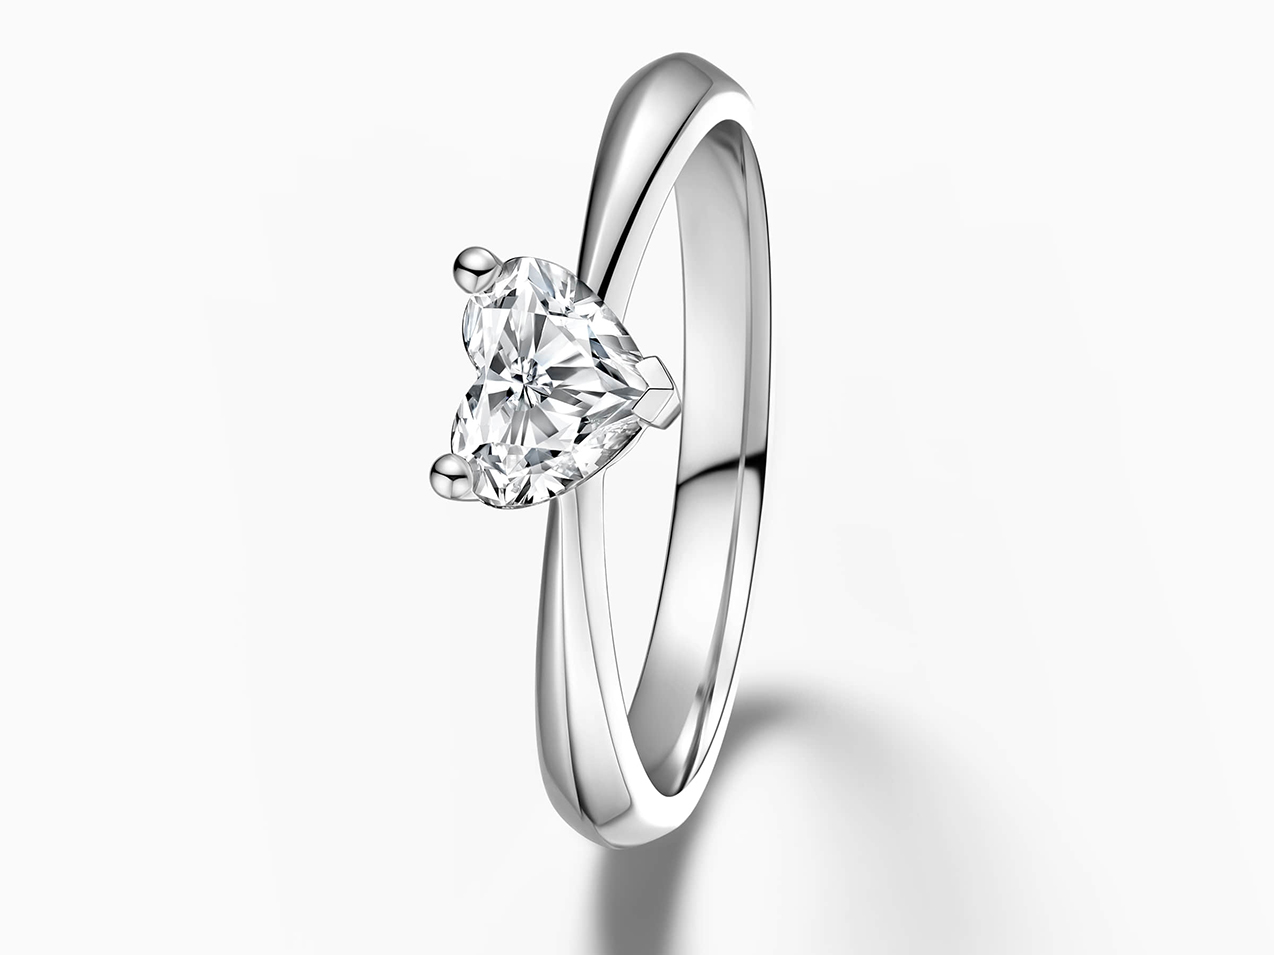 DR heart shaped engagement ring